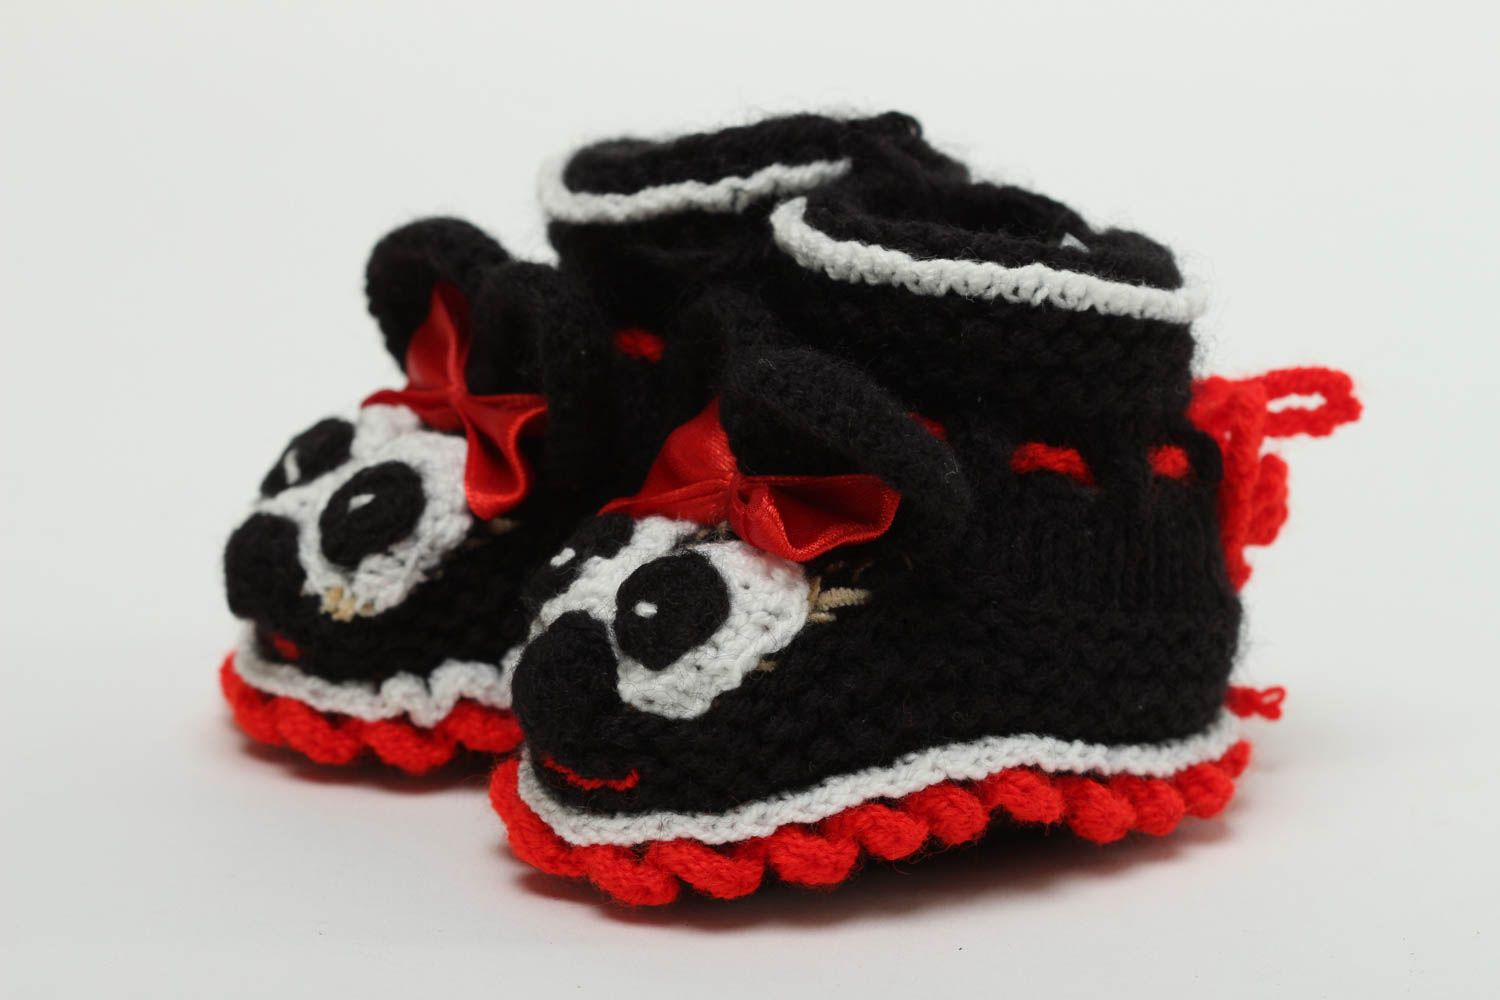 Bright handmade baby bootees crochet baby booties fashion kids gift ideas photo 2